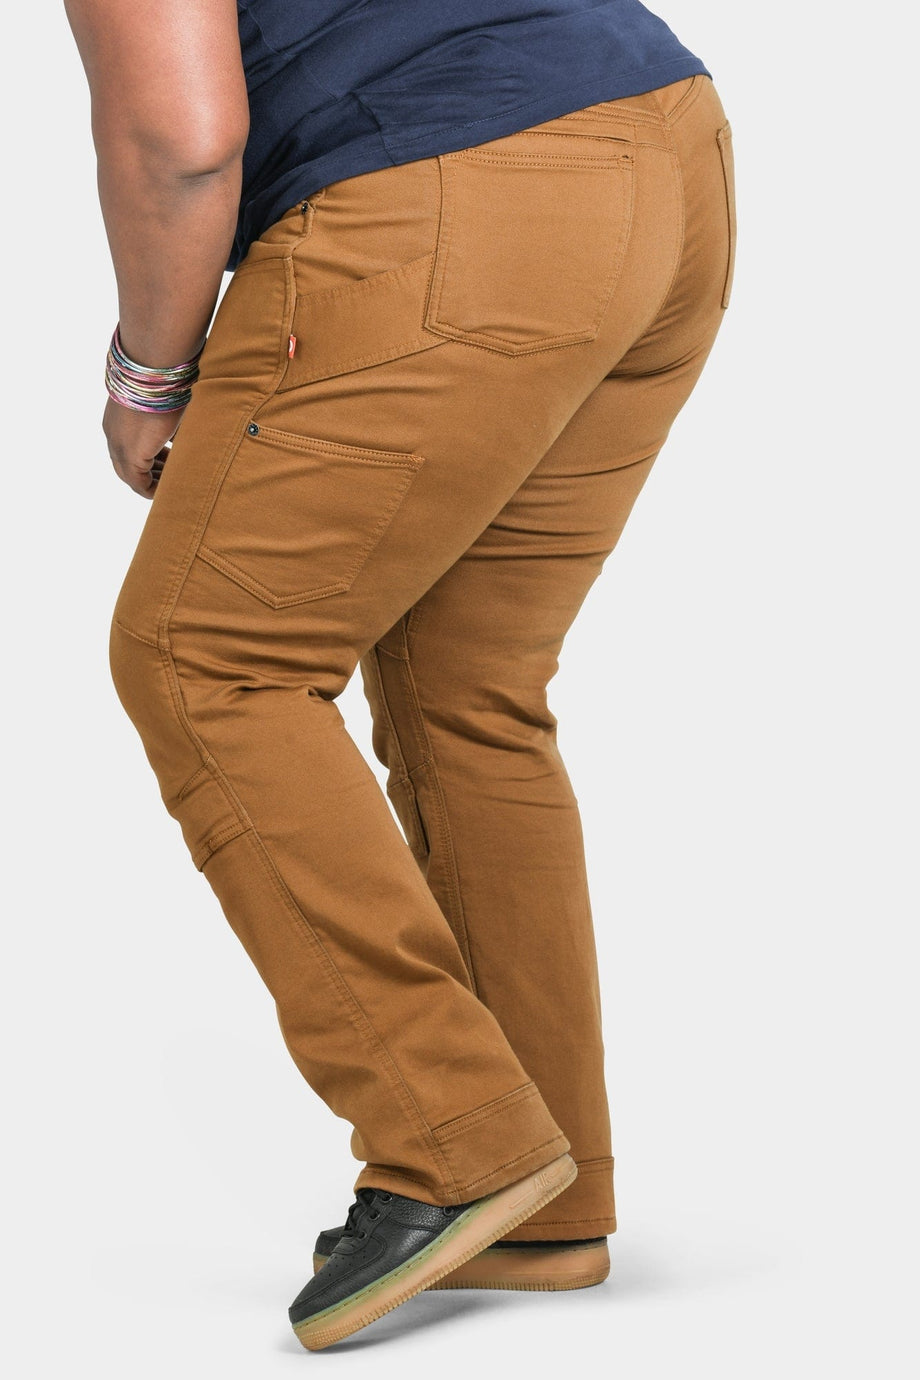 Maven X Pant in Saddle Brown Canvas, Womens Workwear